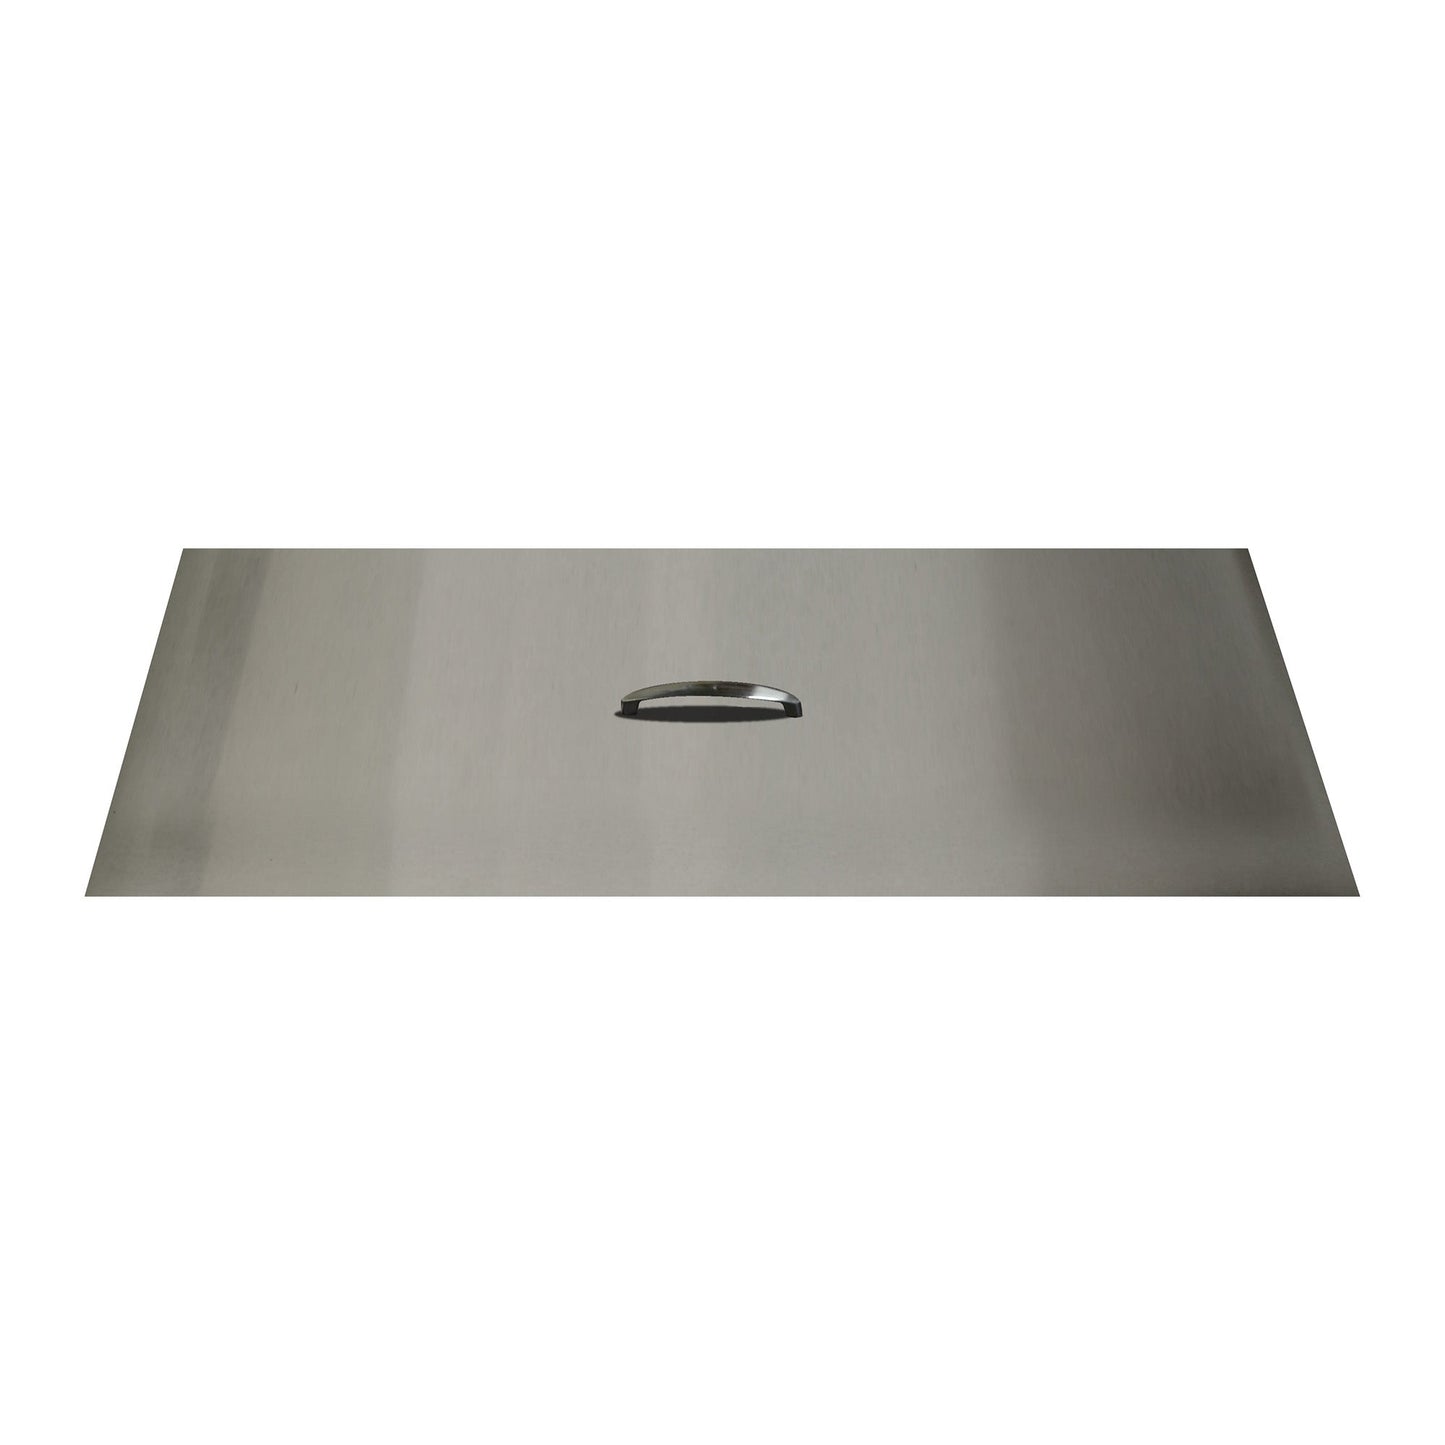 The Outdoor Plus 16" x 76" Stainless Steel Rectangular Fire Pit Lid Cover